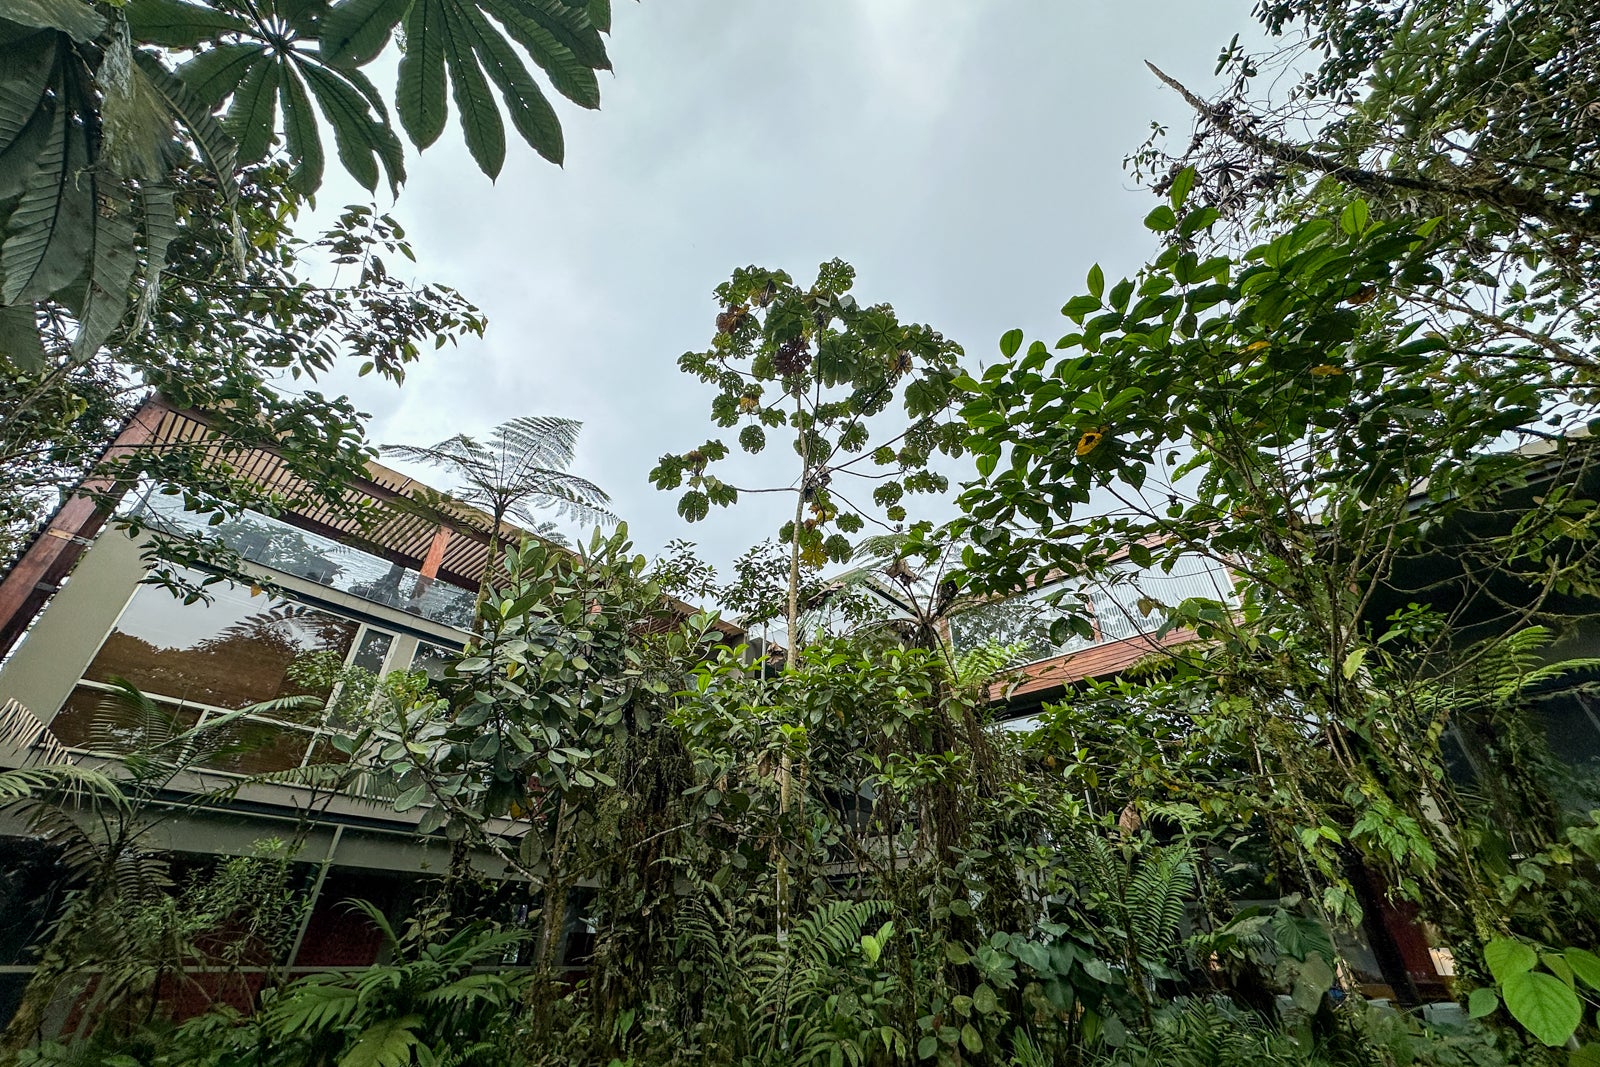 Galapagos Cloud Forest Resort